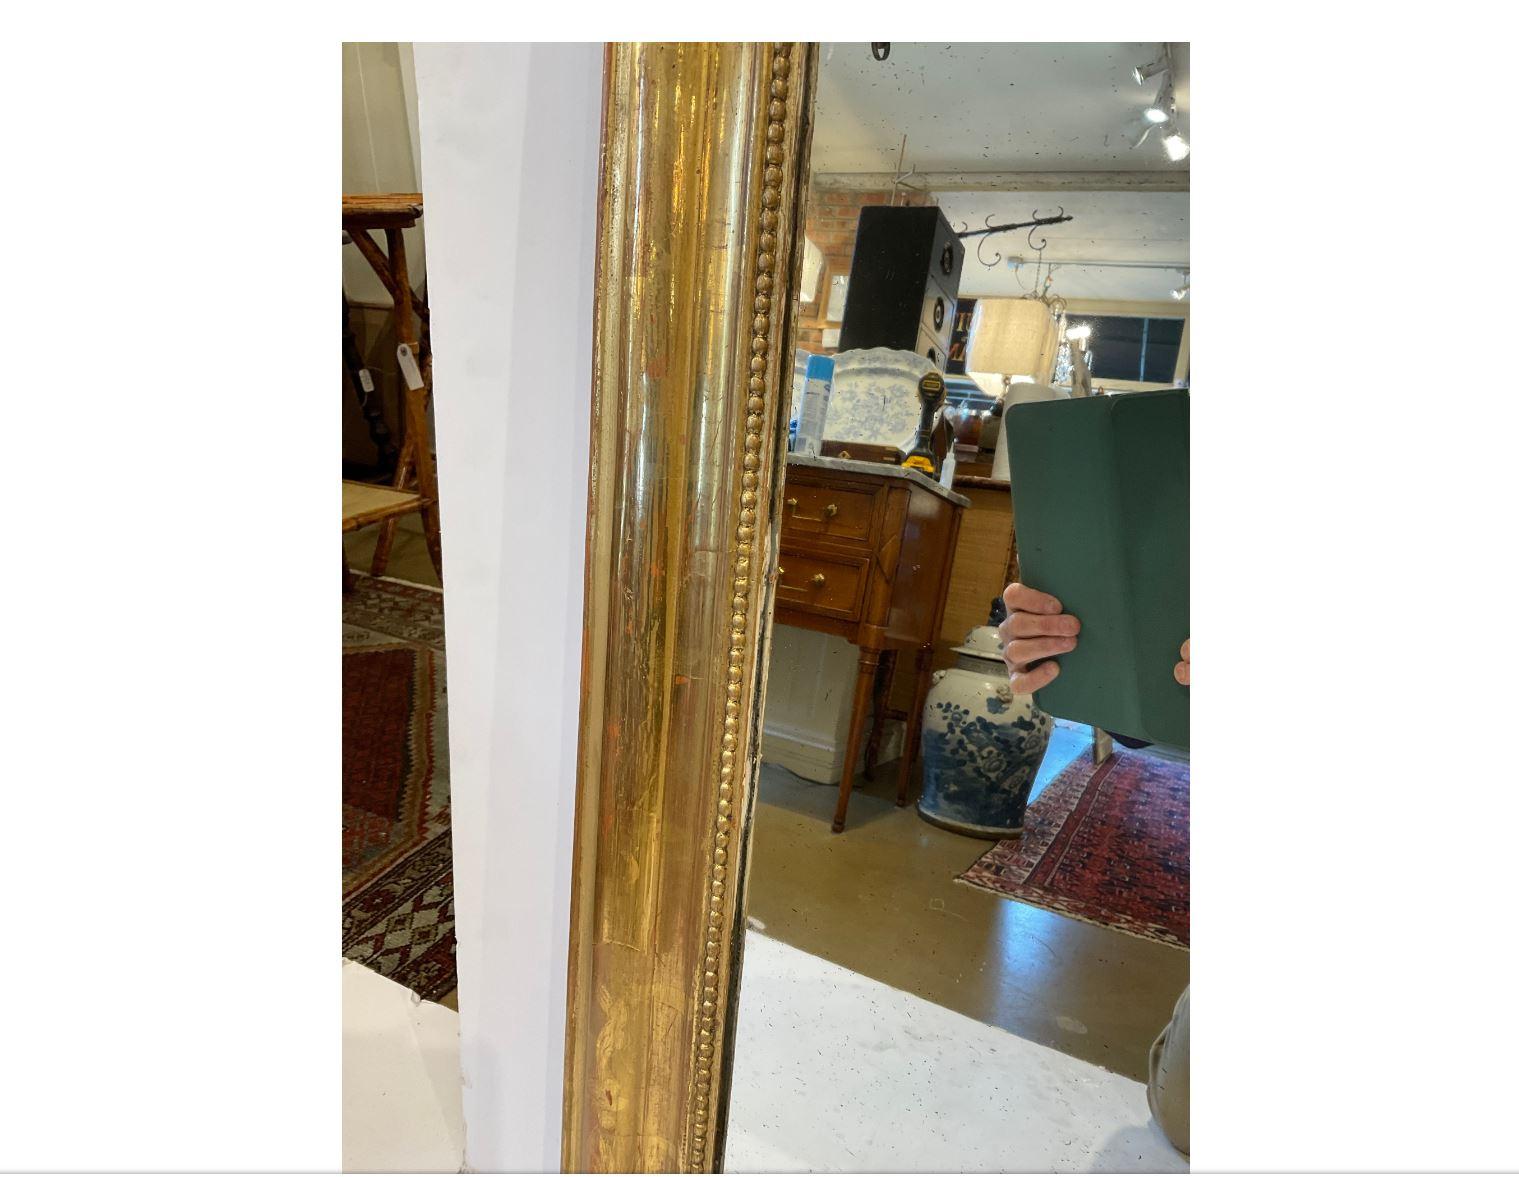 This is a gorgeous 19th Century Louis Philippe mirror. The mirror has a beautiful gold beaded design on the inner border, as well as intricate hand carved floral designing on the outside edges. This would make a wonderful addition to any room!